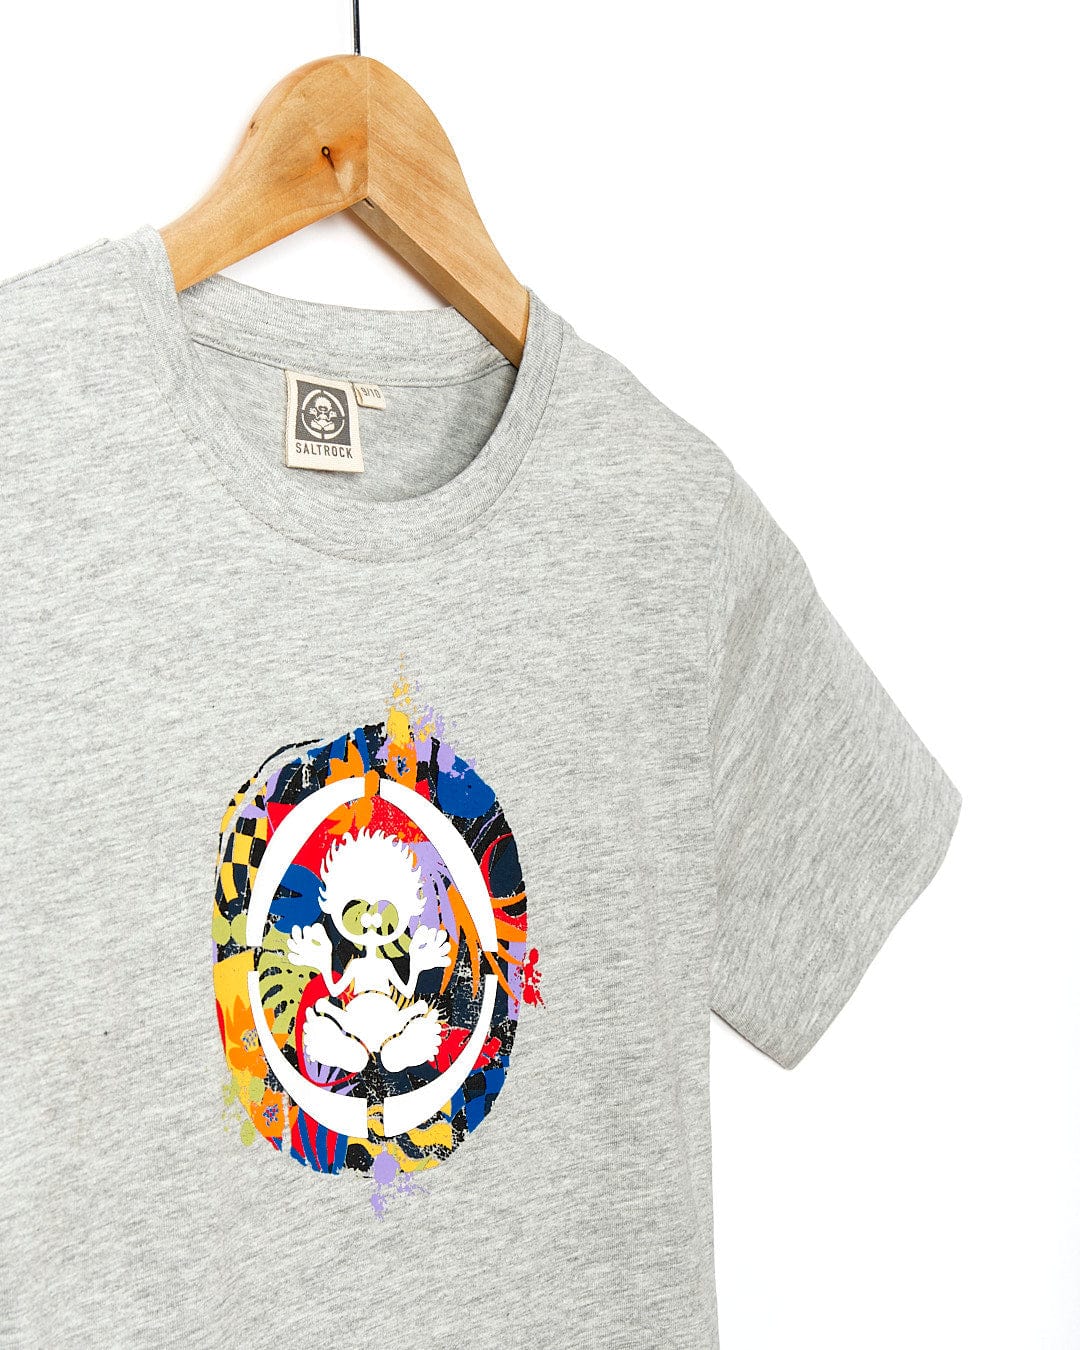 A Saltrock Target Pop - Kids Short Sleeve T-Shirt - Grey with a colorful design on it.